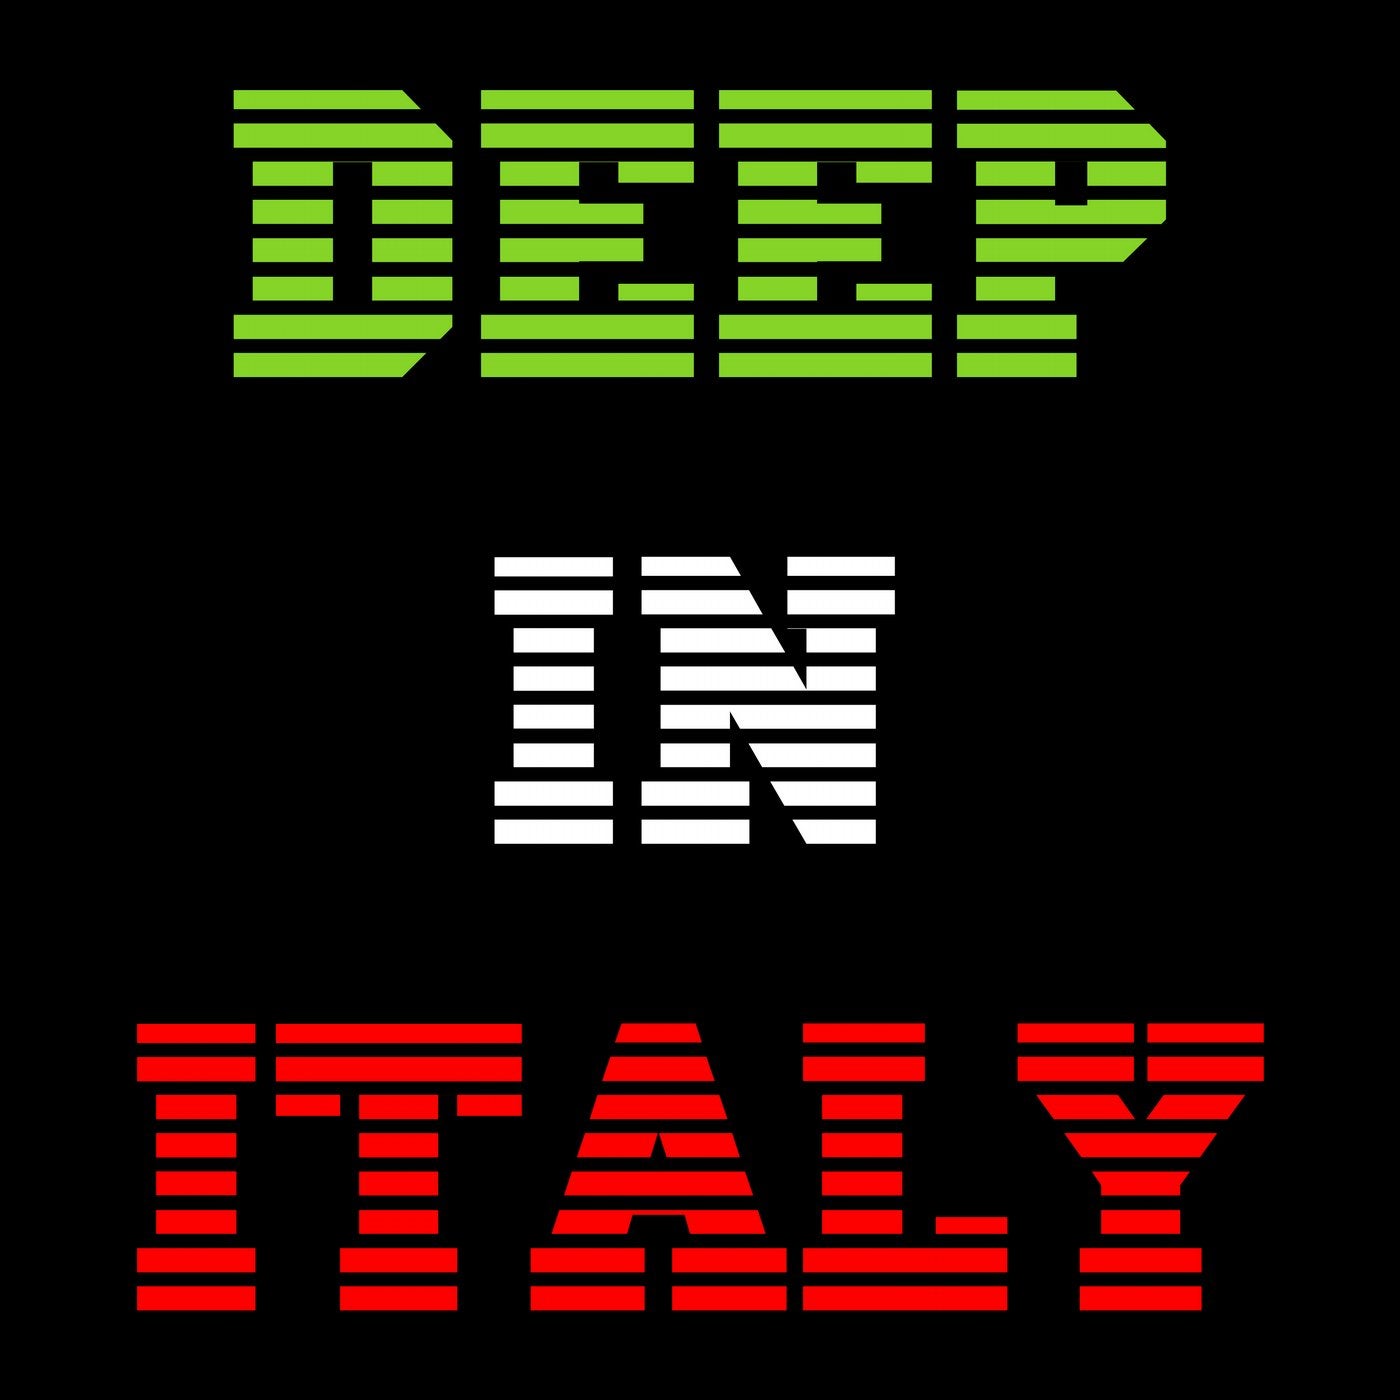 Deep in Italy